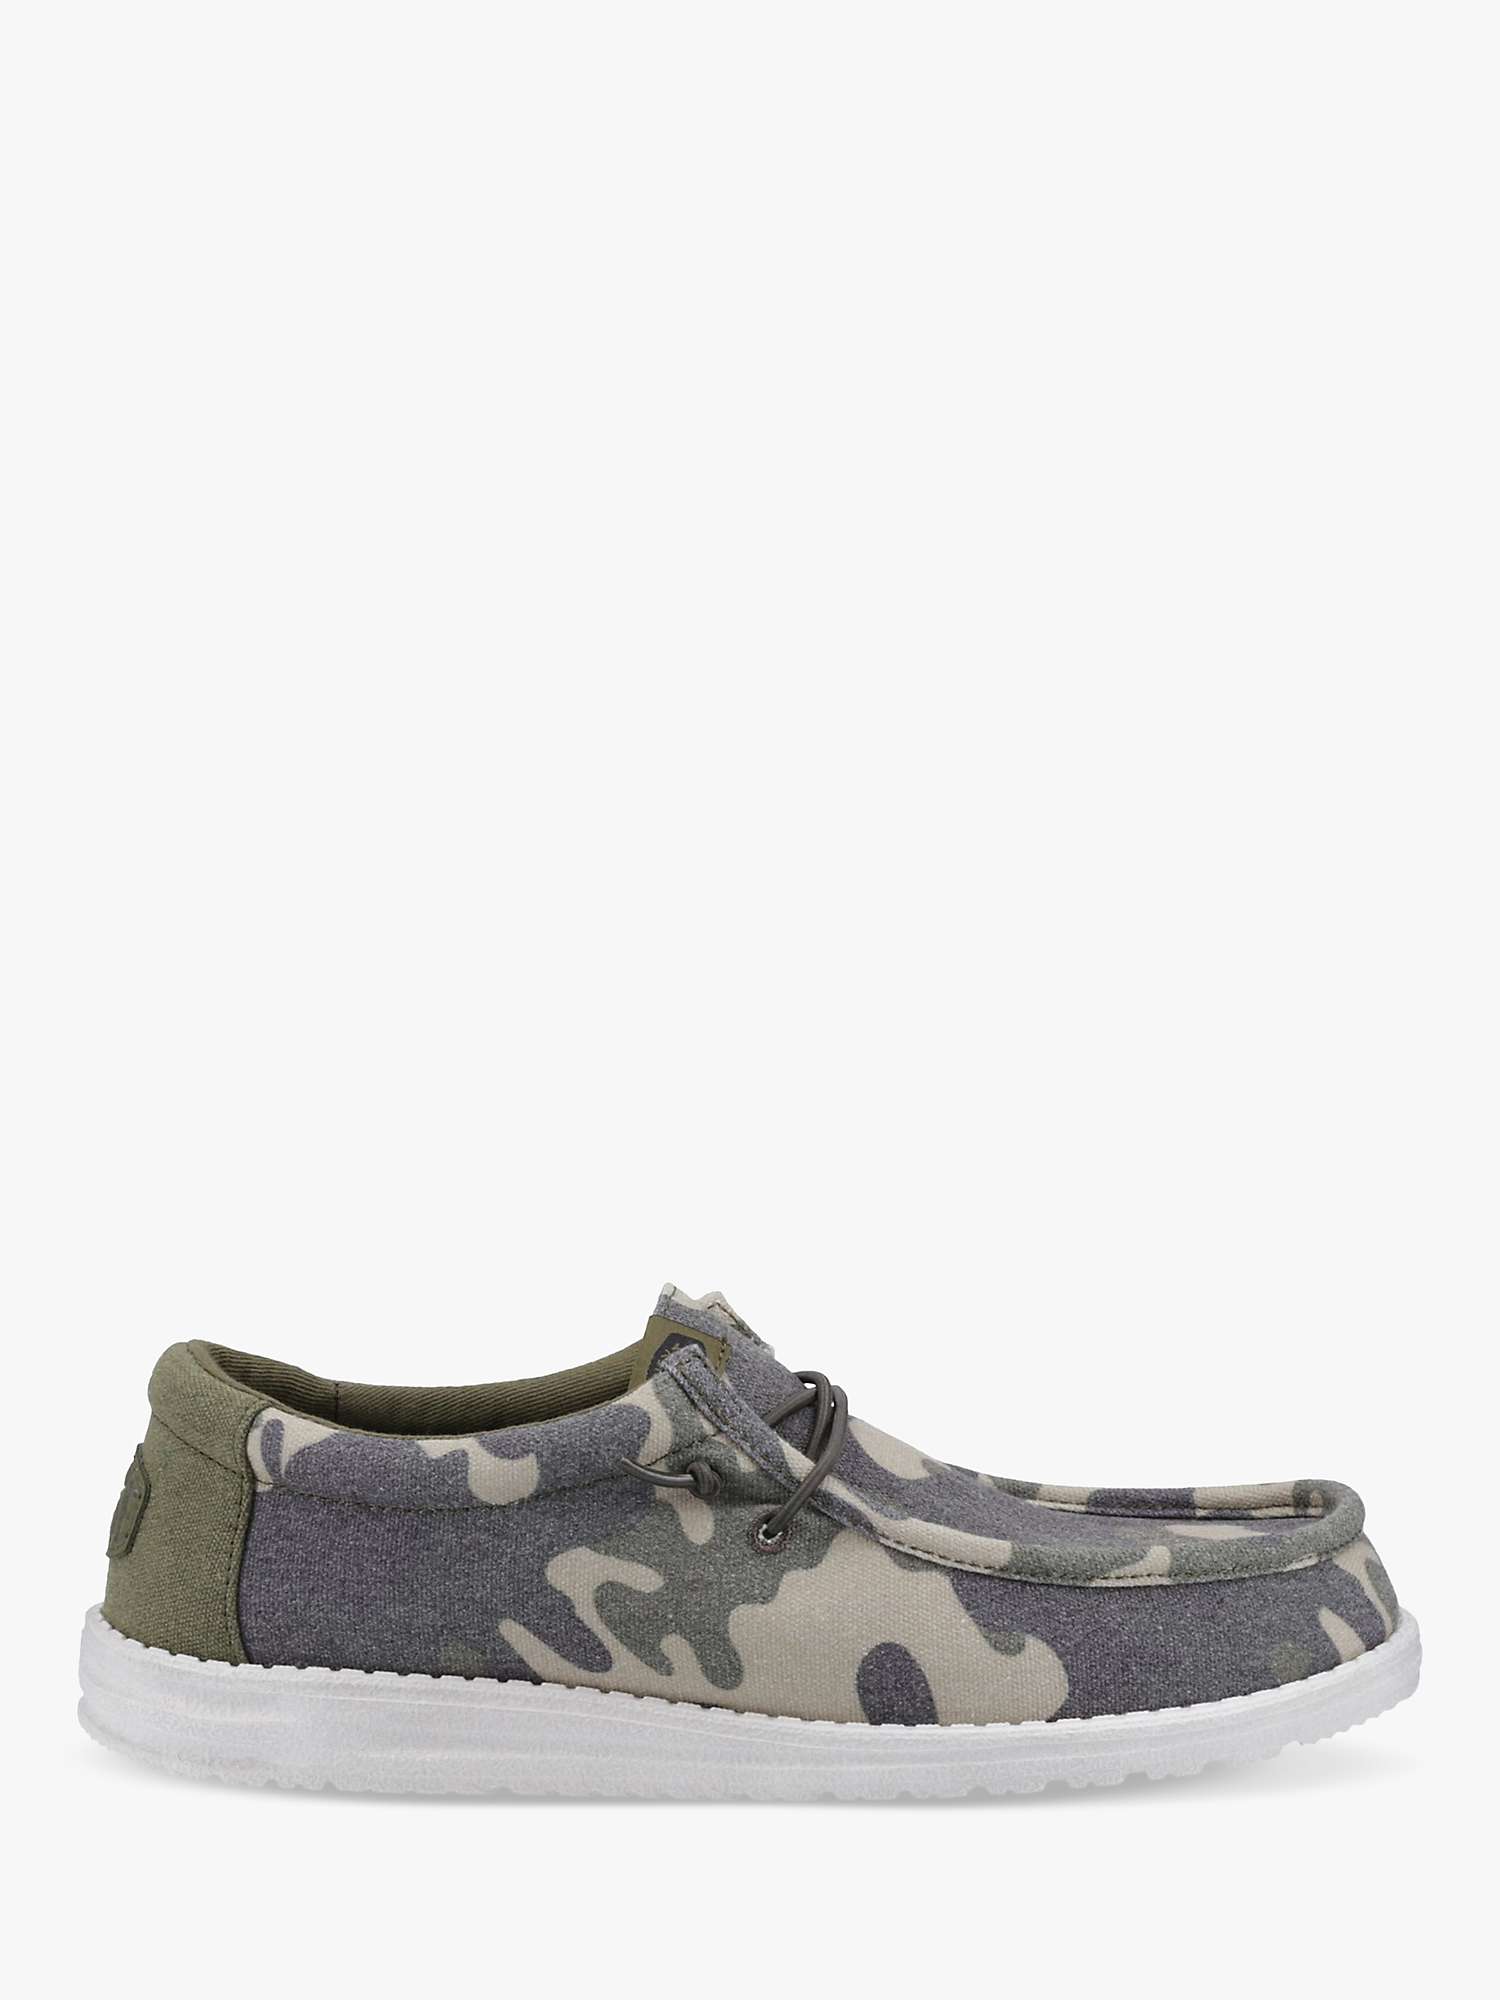 Buy Hey Dude Wally Washed Camo Shoes, Green/Multi Online at johnlewis.com